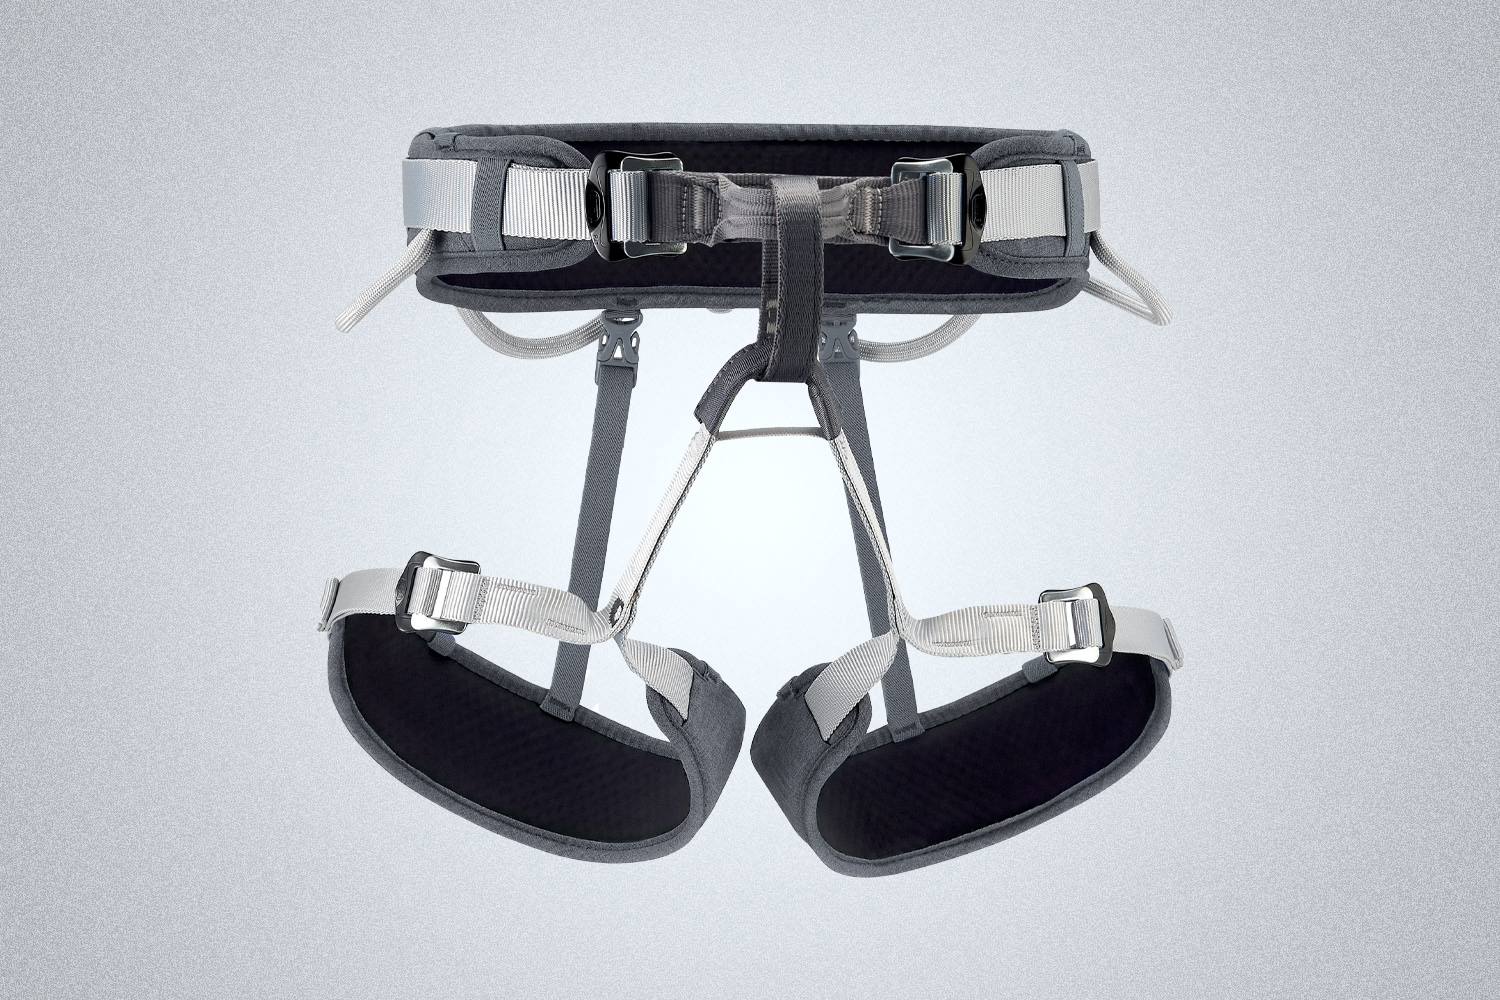 The Petzl Corax harness is the best beginner climbing harness in 2022